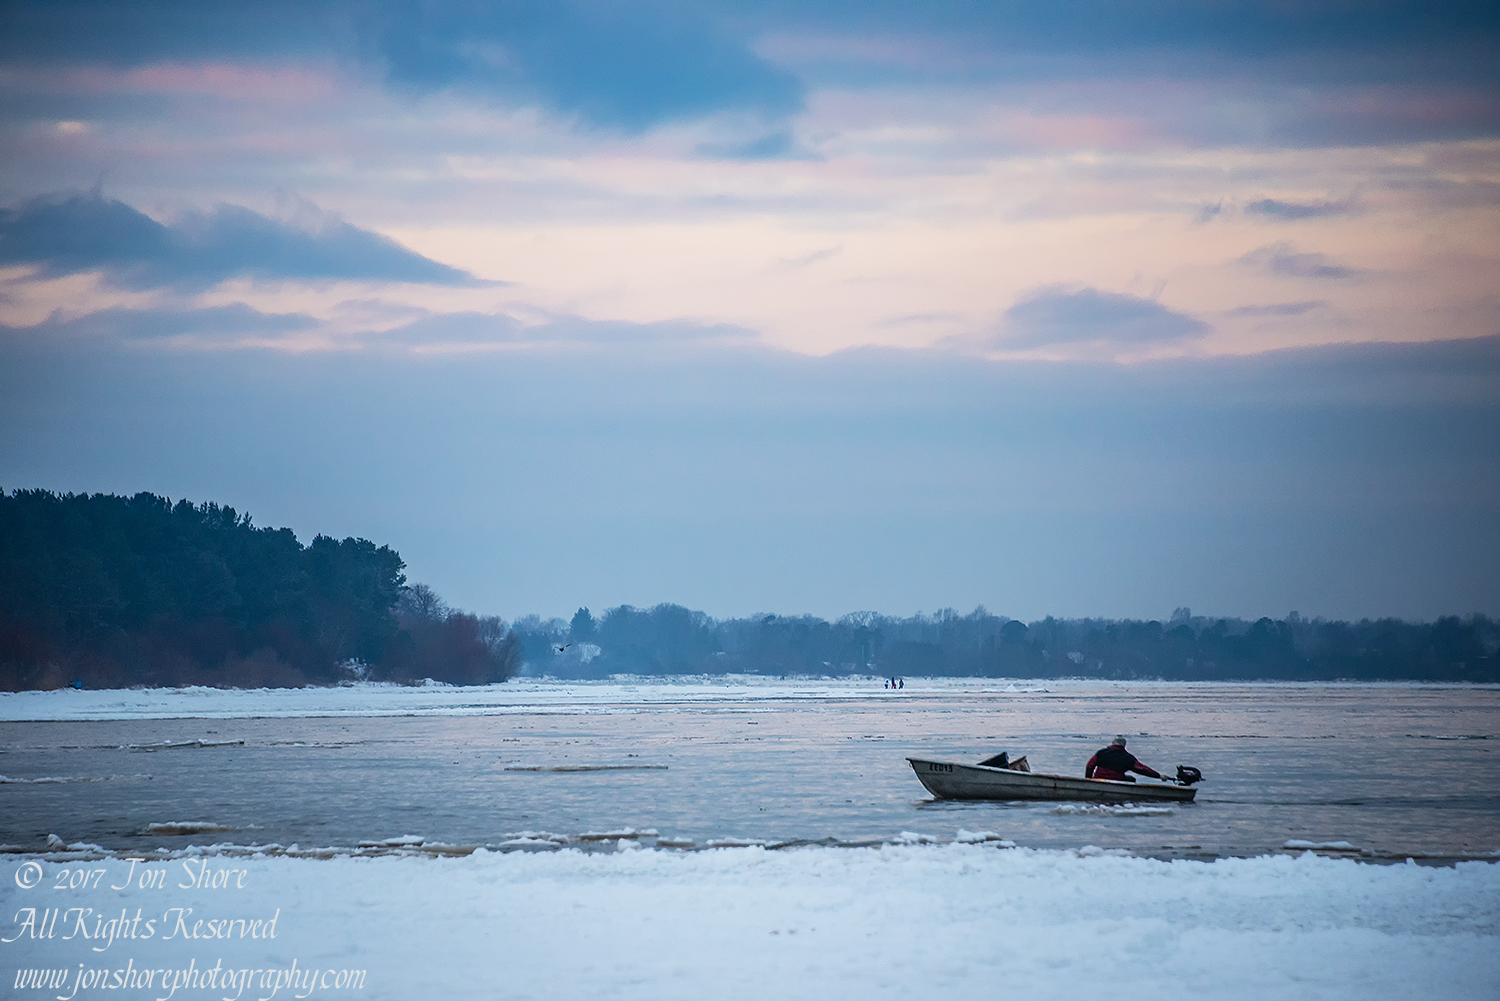 Winter Fishing on the Baltic Sea. Nikkor 200mm